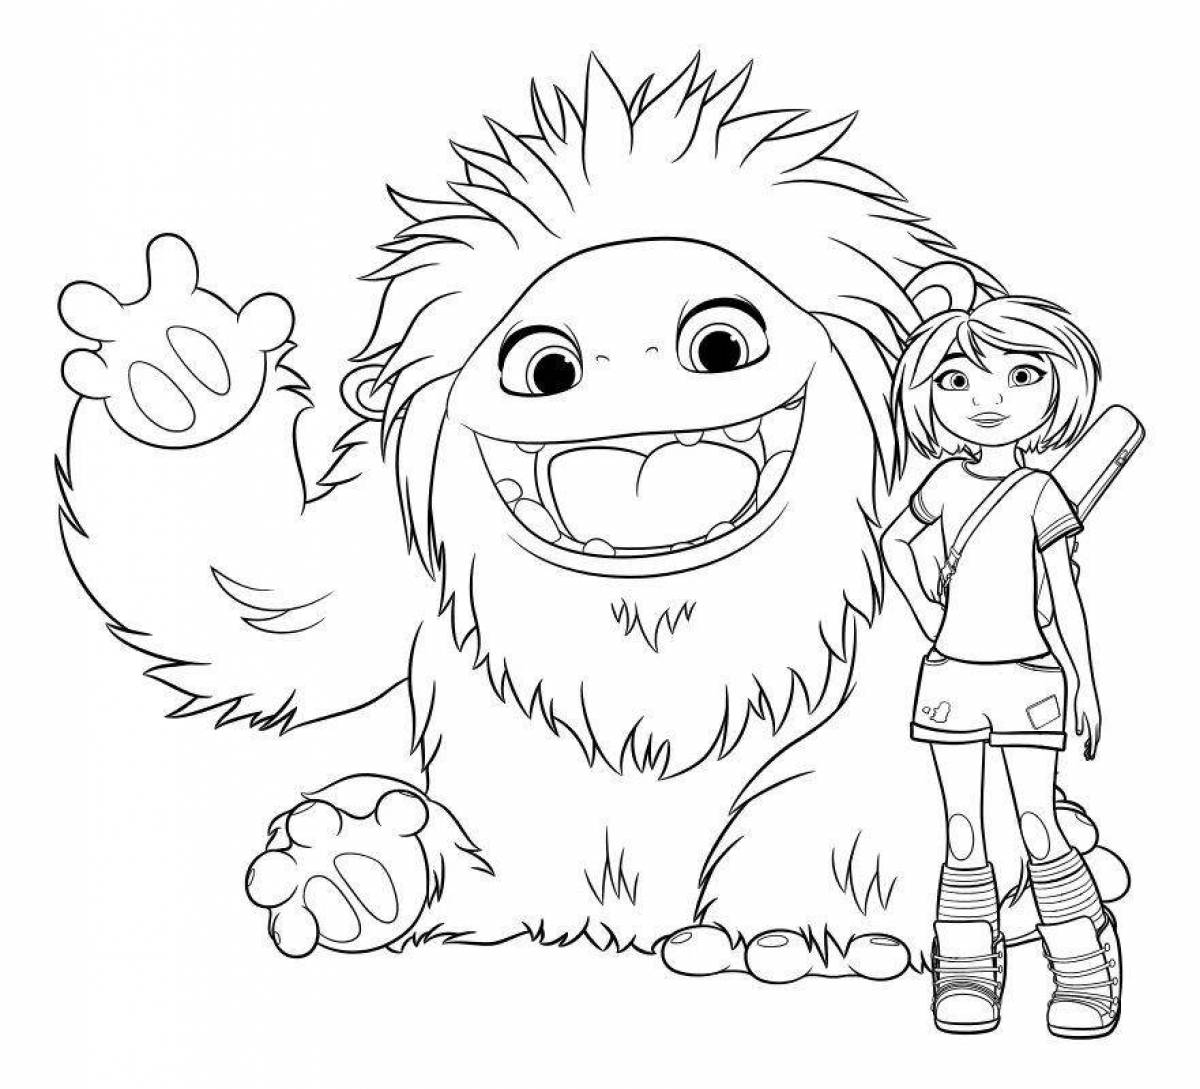 Tempting brownie date coloring page